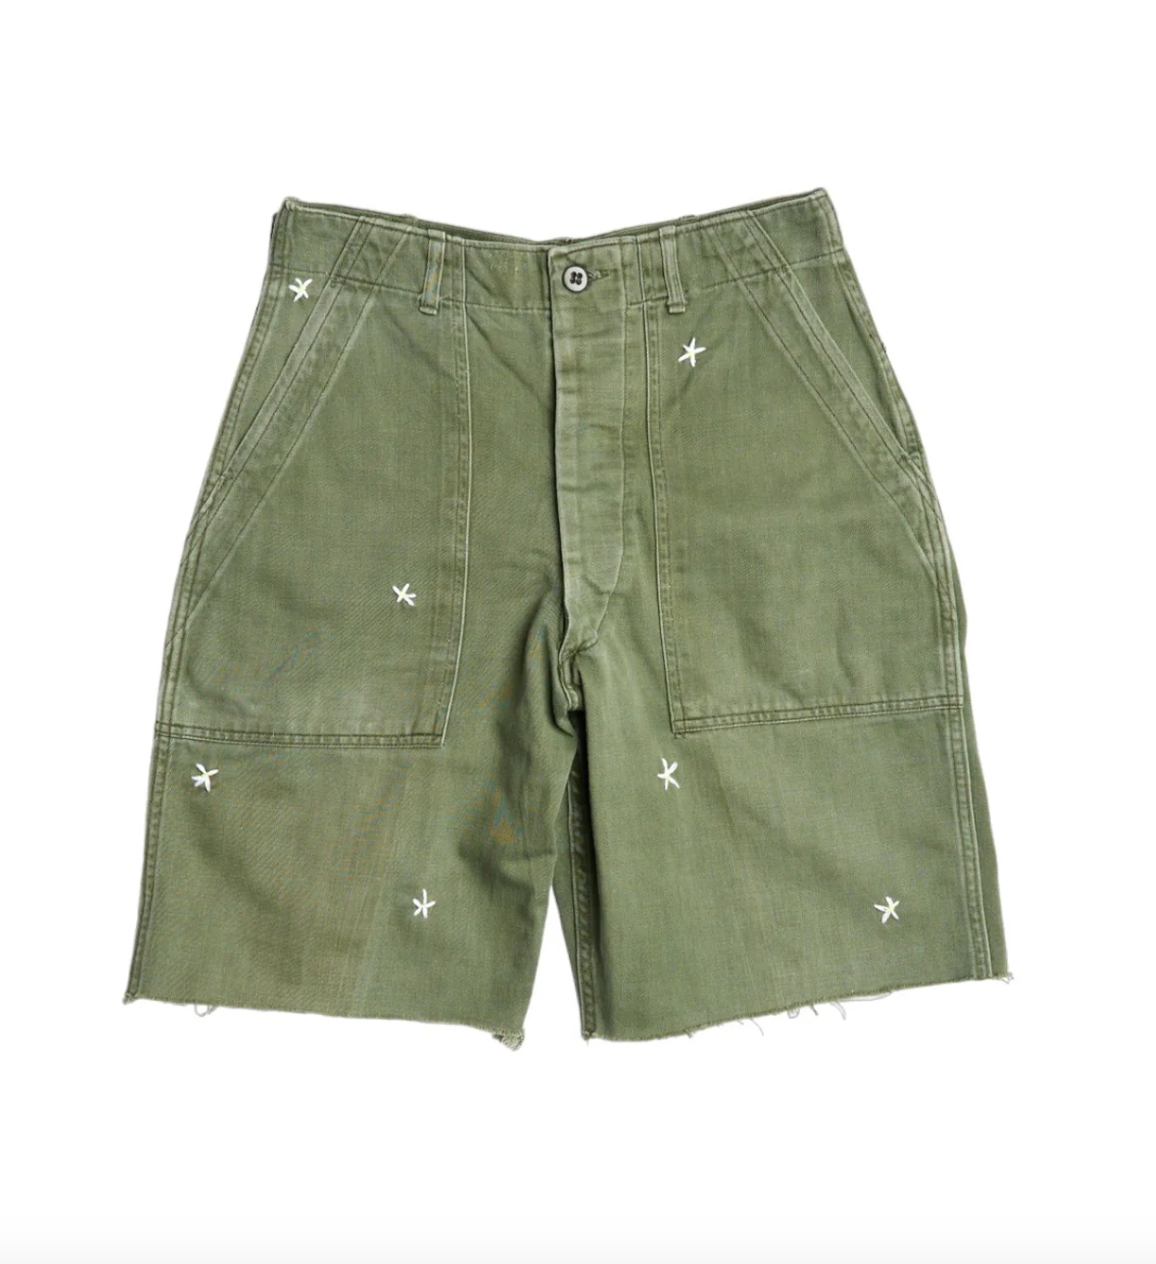 Crosby Vintage Stitched Shorts